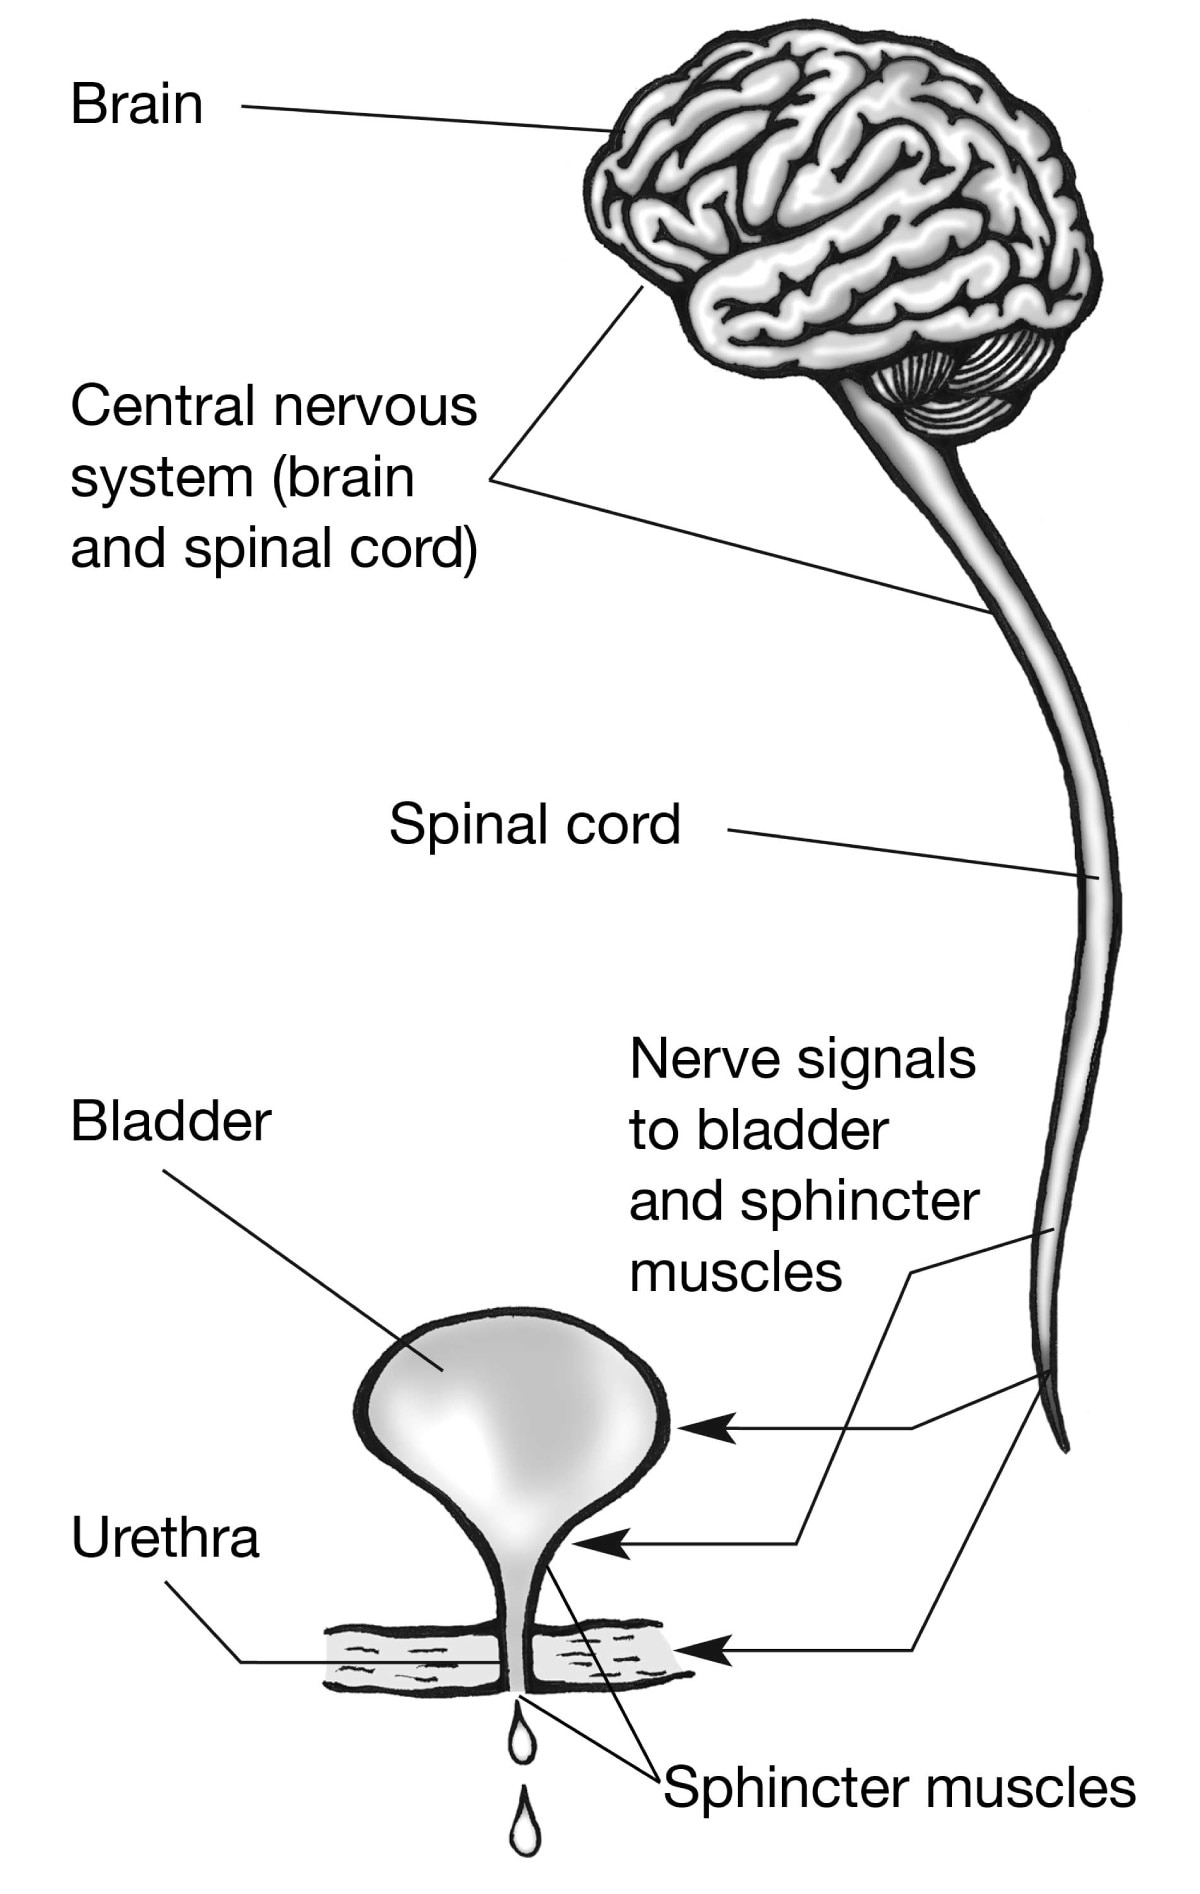 The central nervous system, which includes the brain and spinal cord, showing nerve signals travelling from the brain, through the spinal cord, to the bladder, urethra, and sphincter muscles.